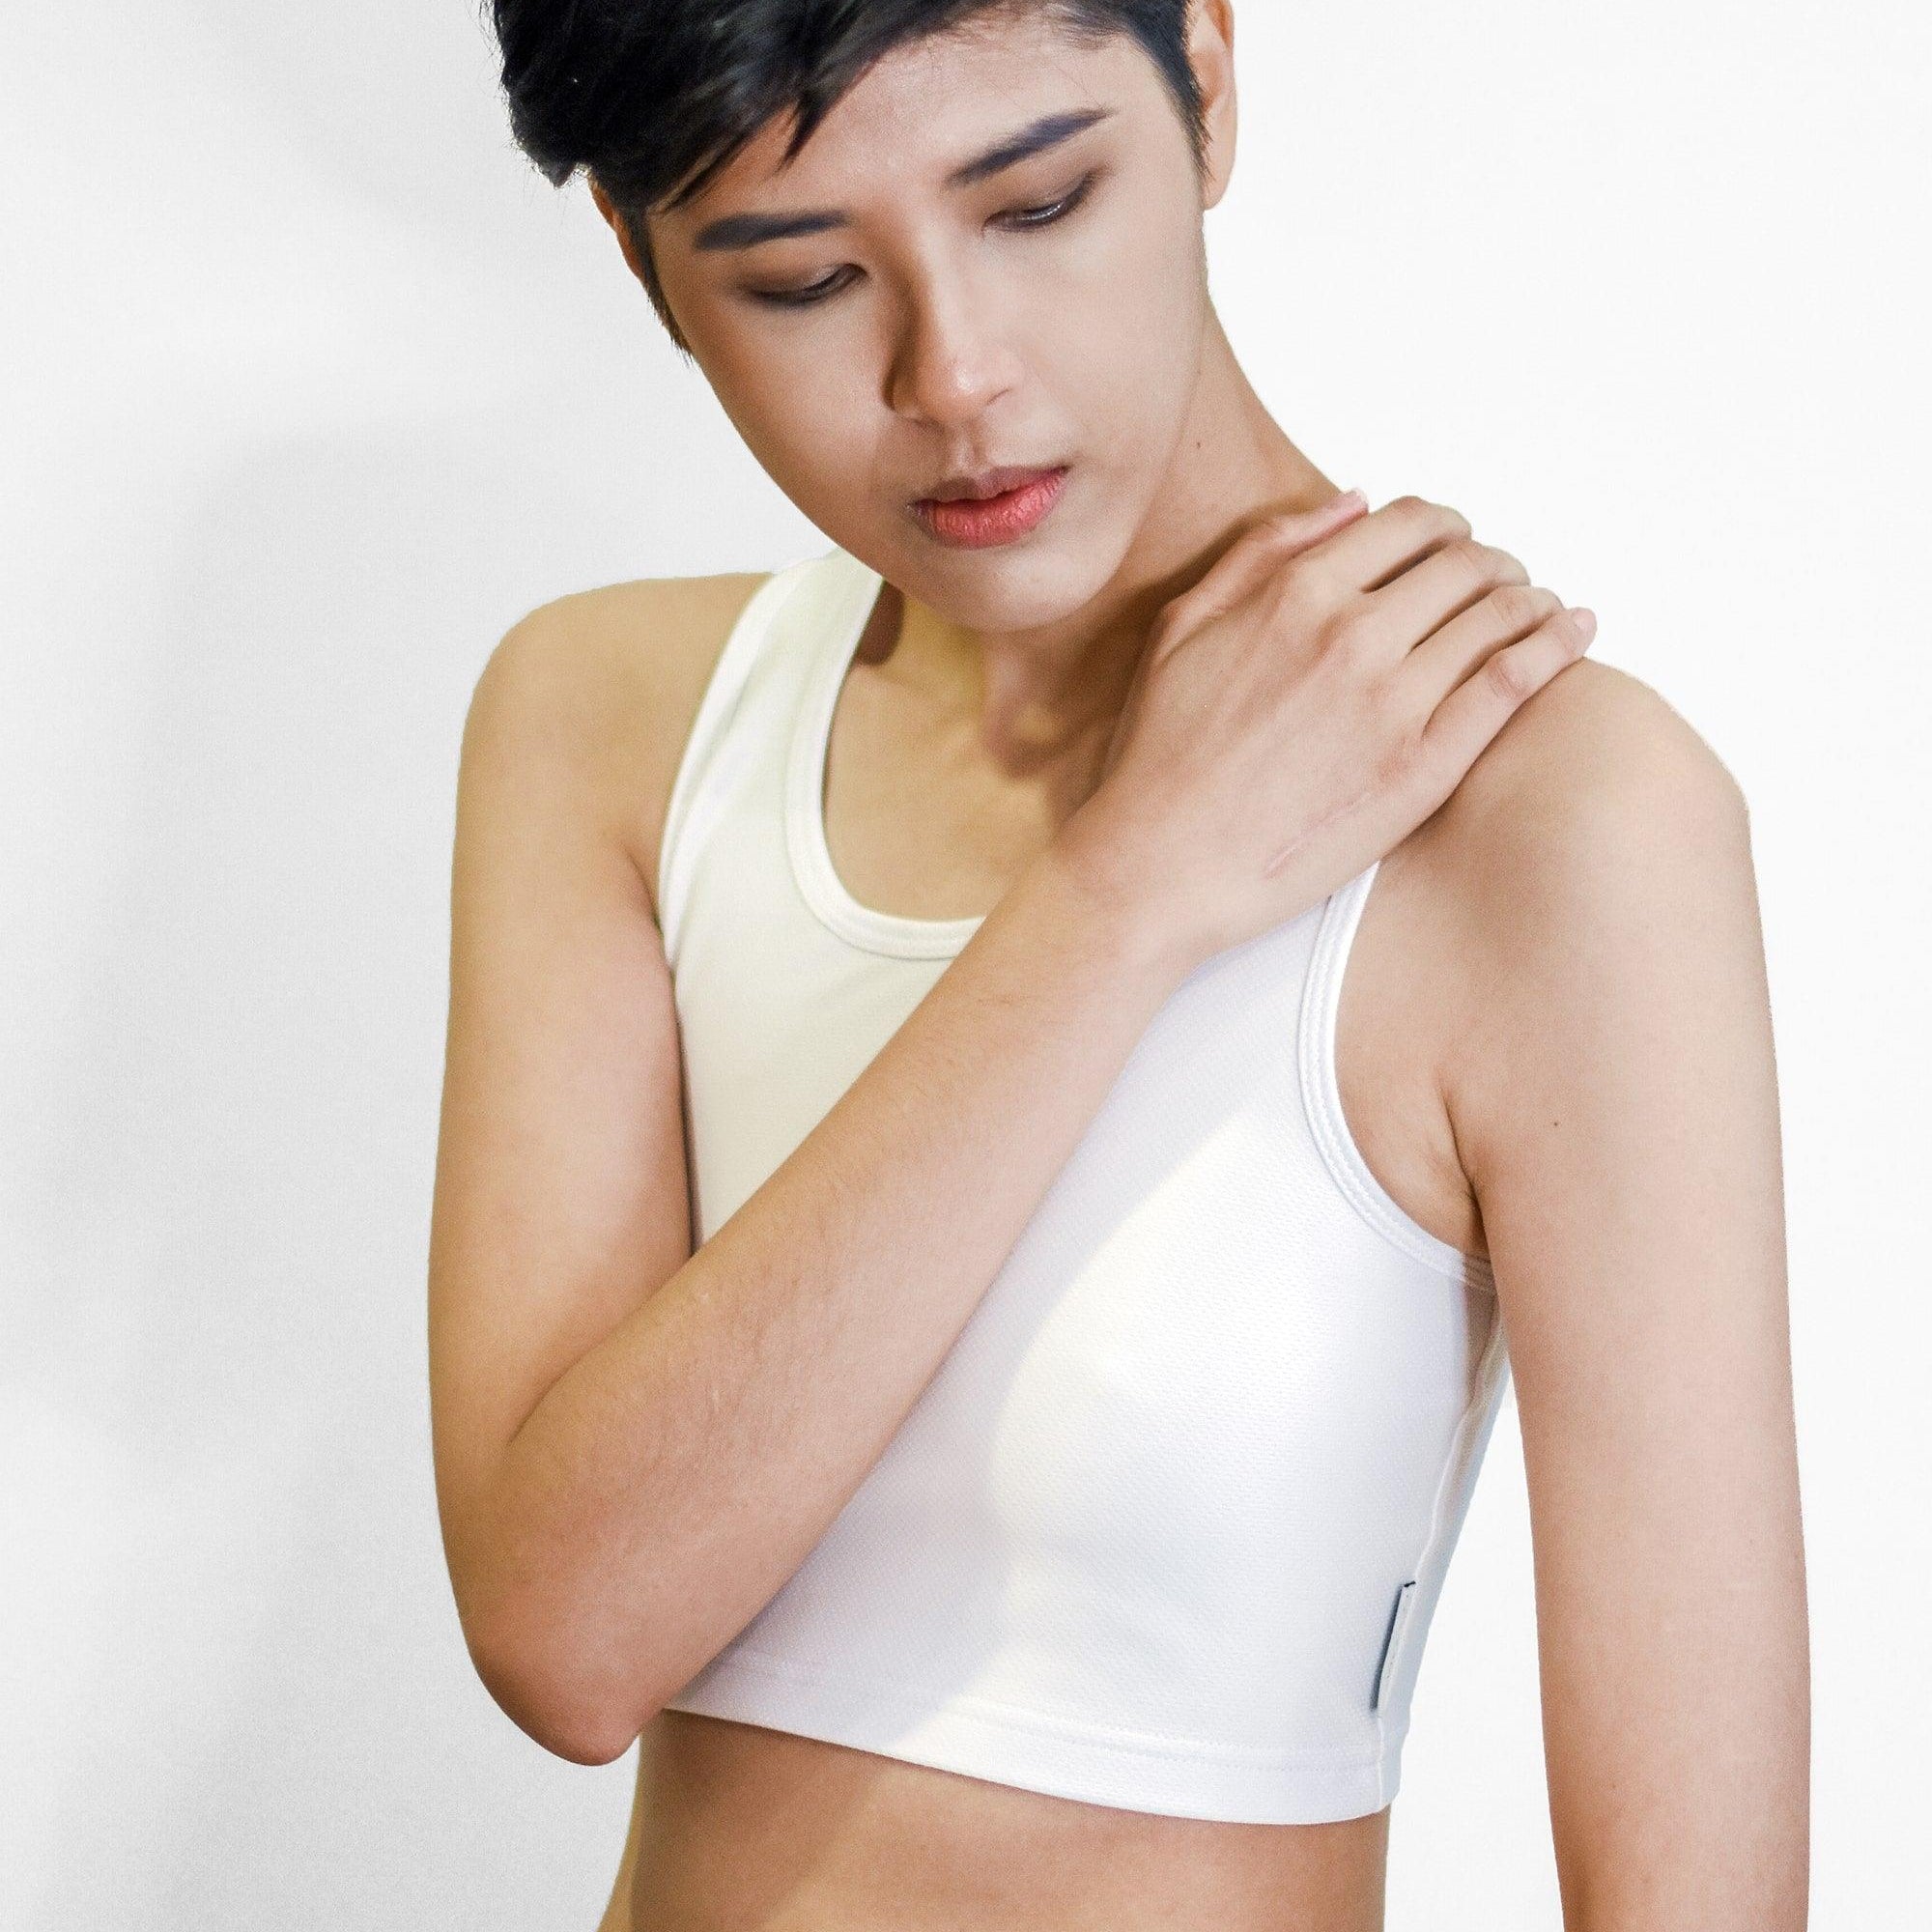 Non-binary Tomboy in a white color non-bandage TOMSCOUT Chest Binder, part of the TOMSCOUT ACTIVE BINDER collection, showcasing a clearance binder that's affordable yet high quality.